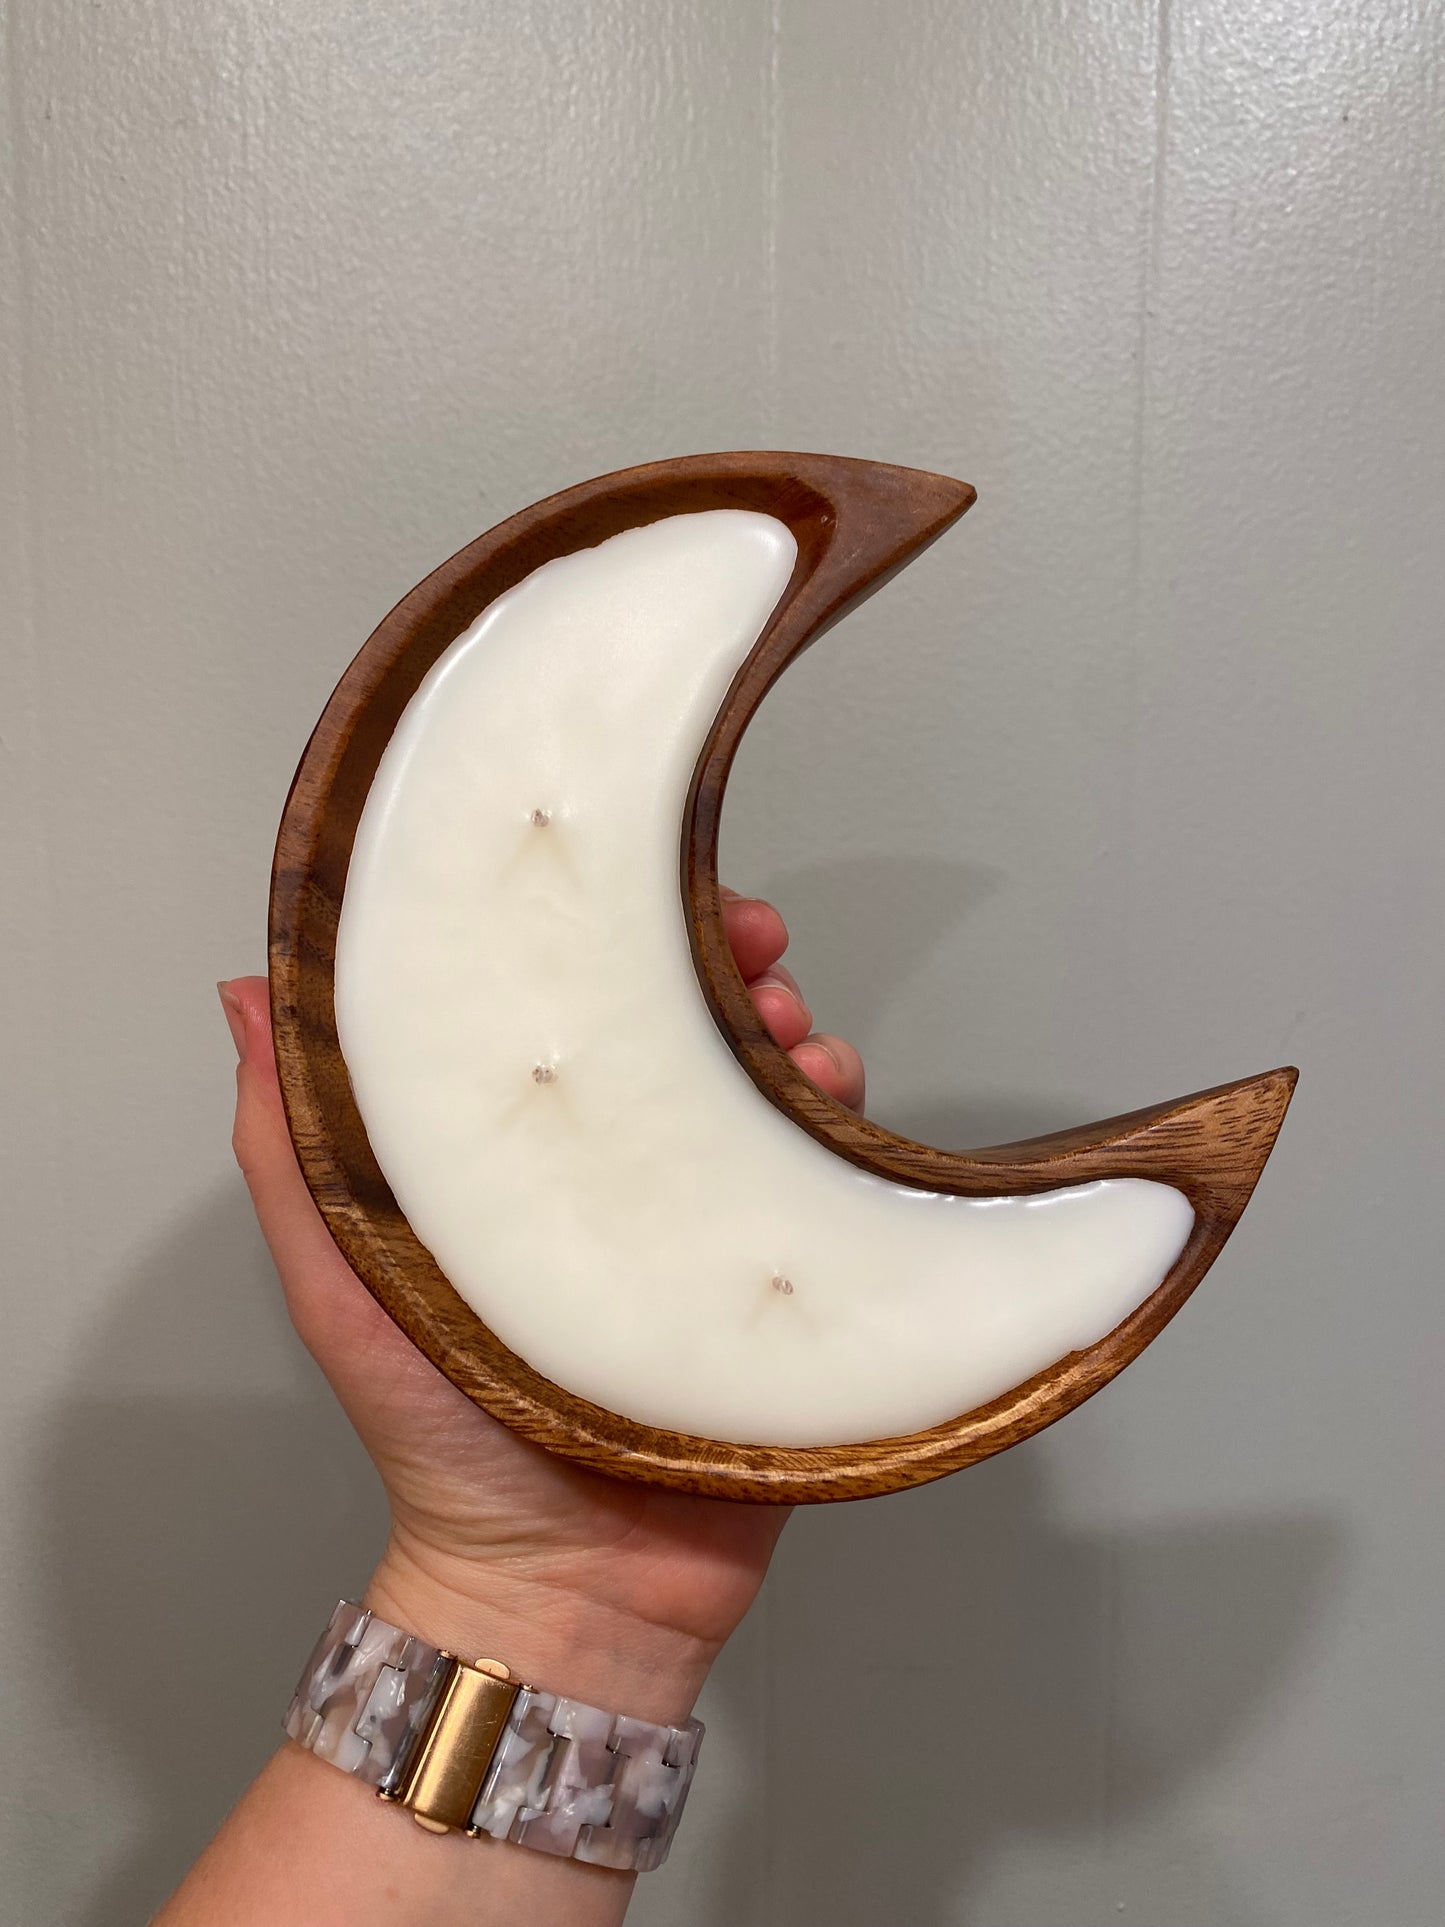 Wooden moon bowl candle